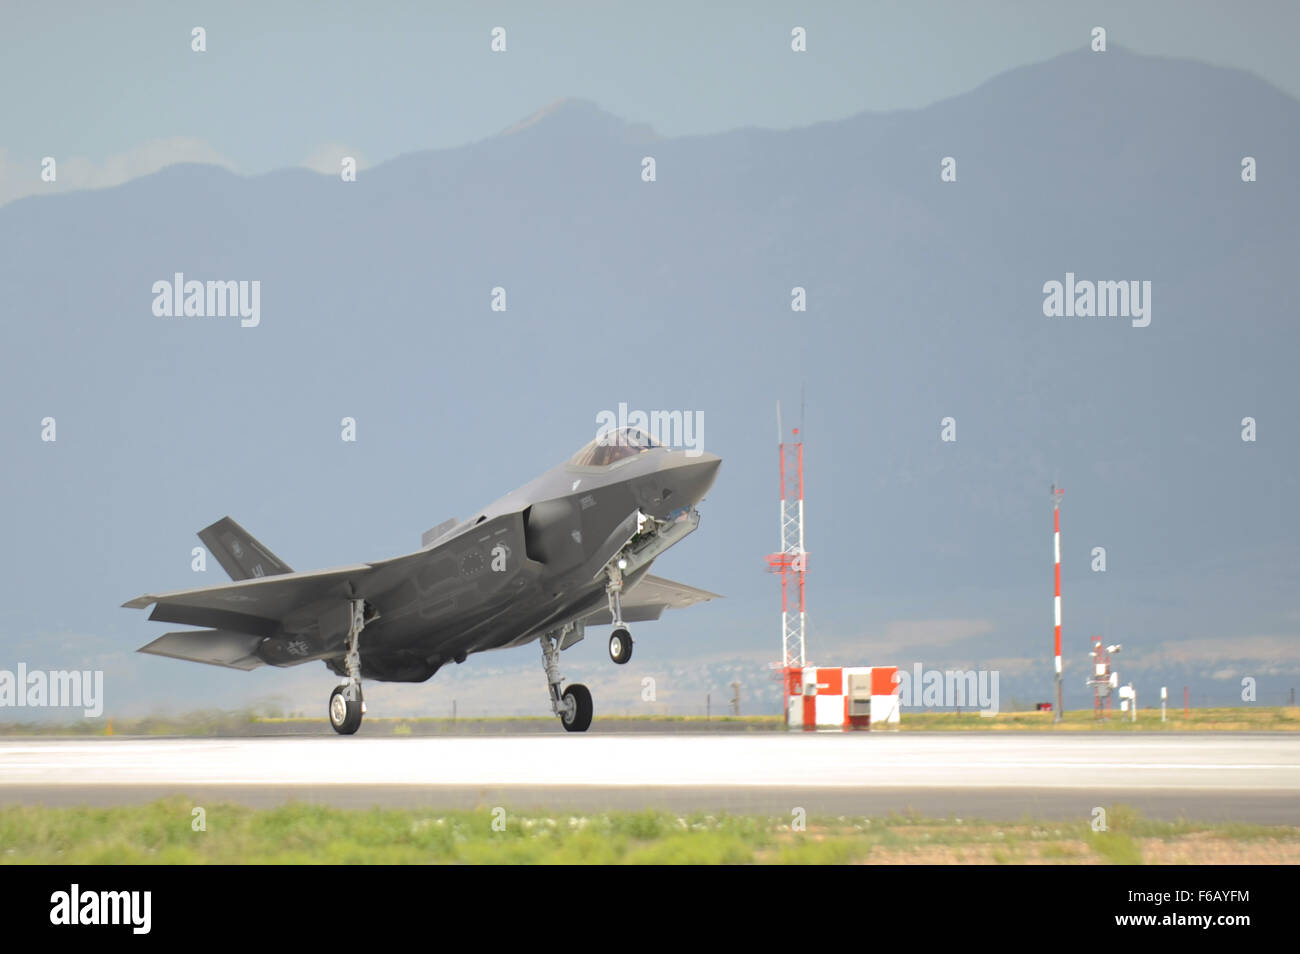 An F-35A Lightning II aircraft piloted by Col. David Lyons, 388th Fighter Wing commander, touches down at Hill Air Force Base, Utah, Sept. 2, 2015. This and another fighter jet piloted by Lt. Col. Yosef Morris, 34th Fighter squadron director of operations, were the first two operational F-35s to be received at the base. The rest of the fleet of up to 72 F-35s will be coming in on a staggered basis, spread through 2019. Selecting Hill AFB to host America's newest fifth generation fighter is a tribute to the active-duty 388th and Reserve 419th Fighter Wings' rich heritage. It is fitting the 388t Stock Photo